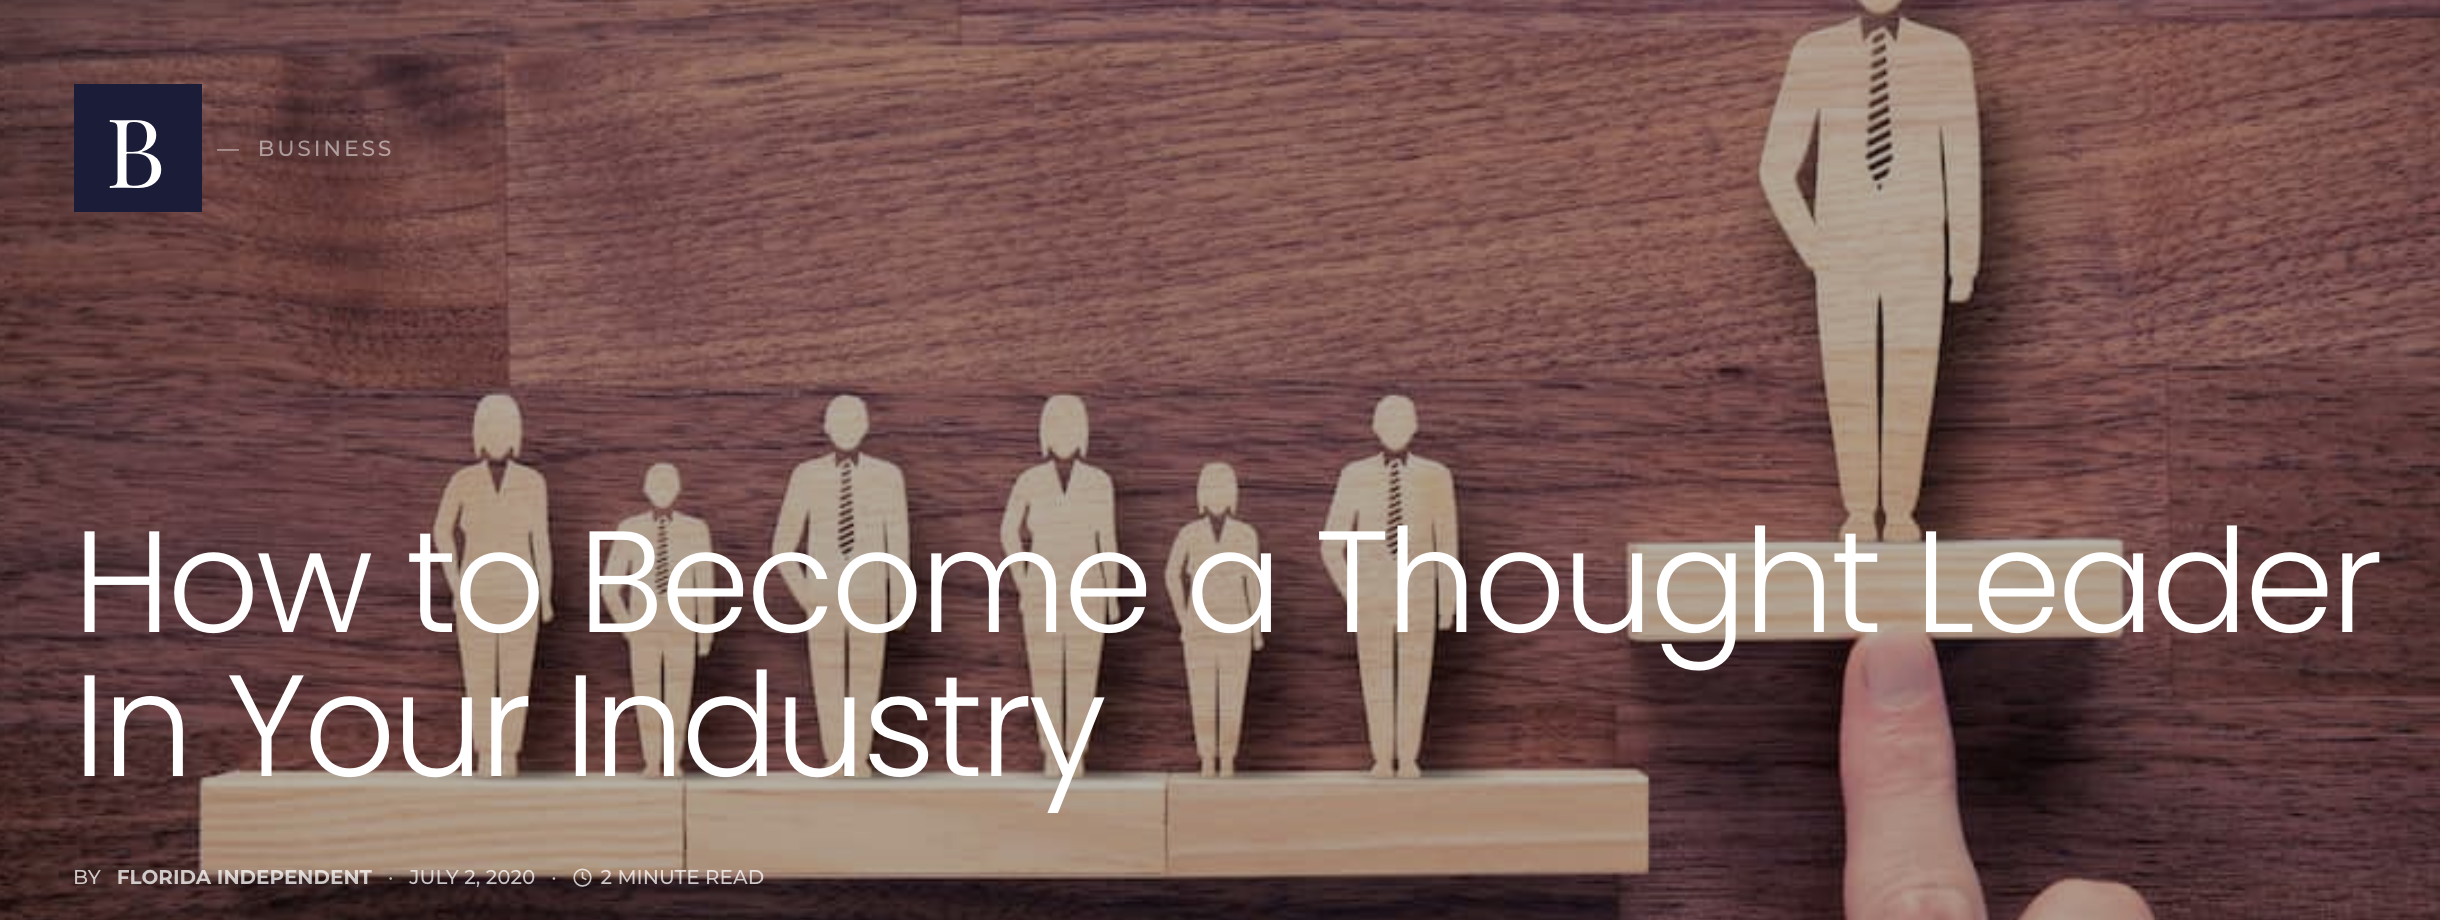 How To Become A Thought Leader In Your Industry